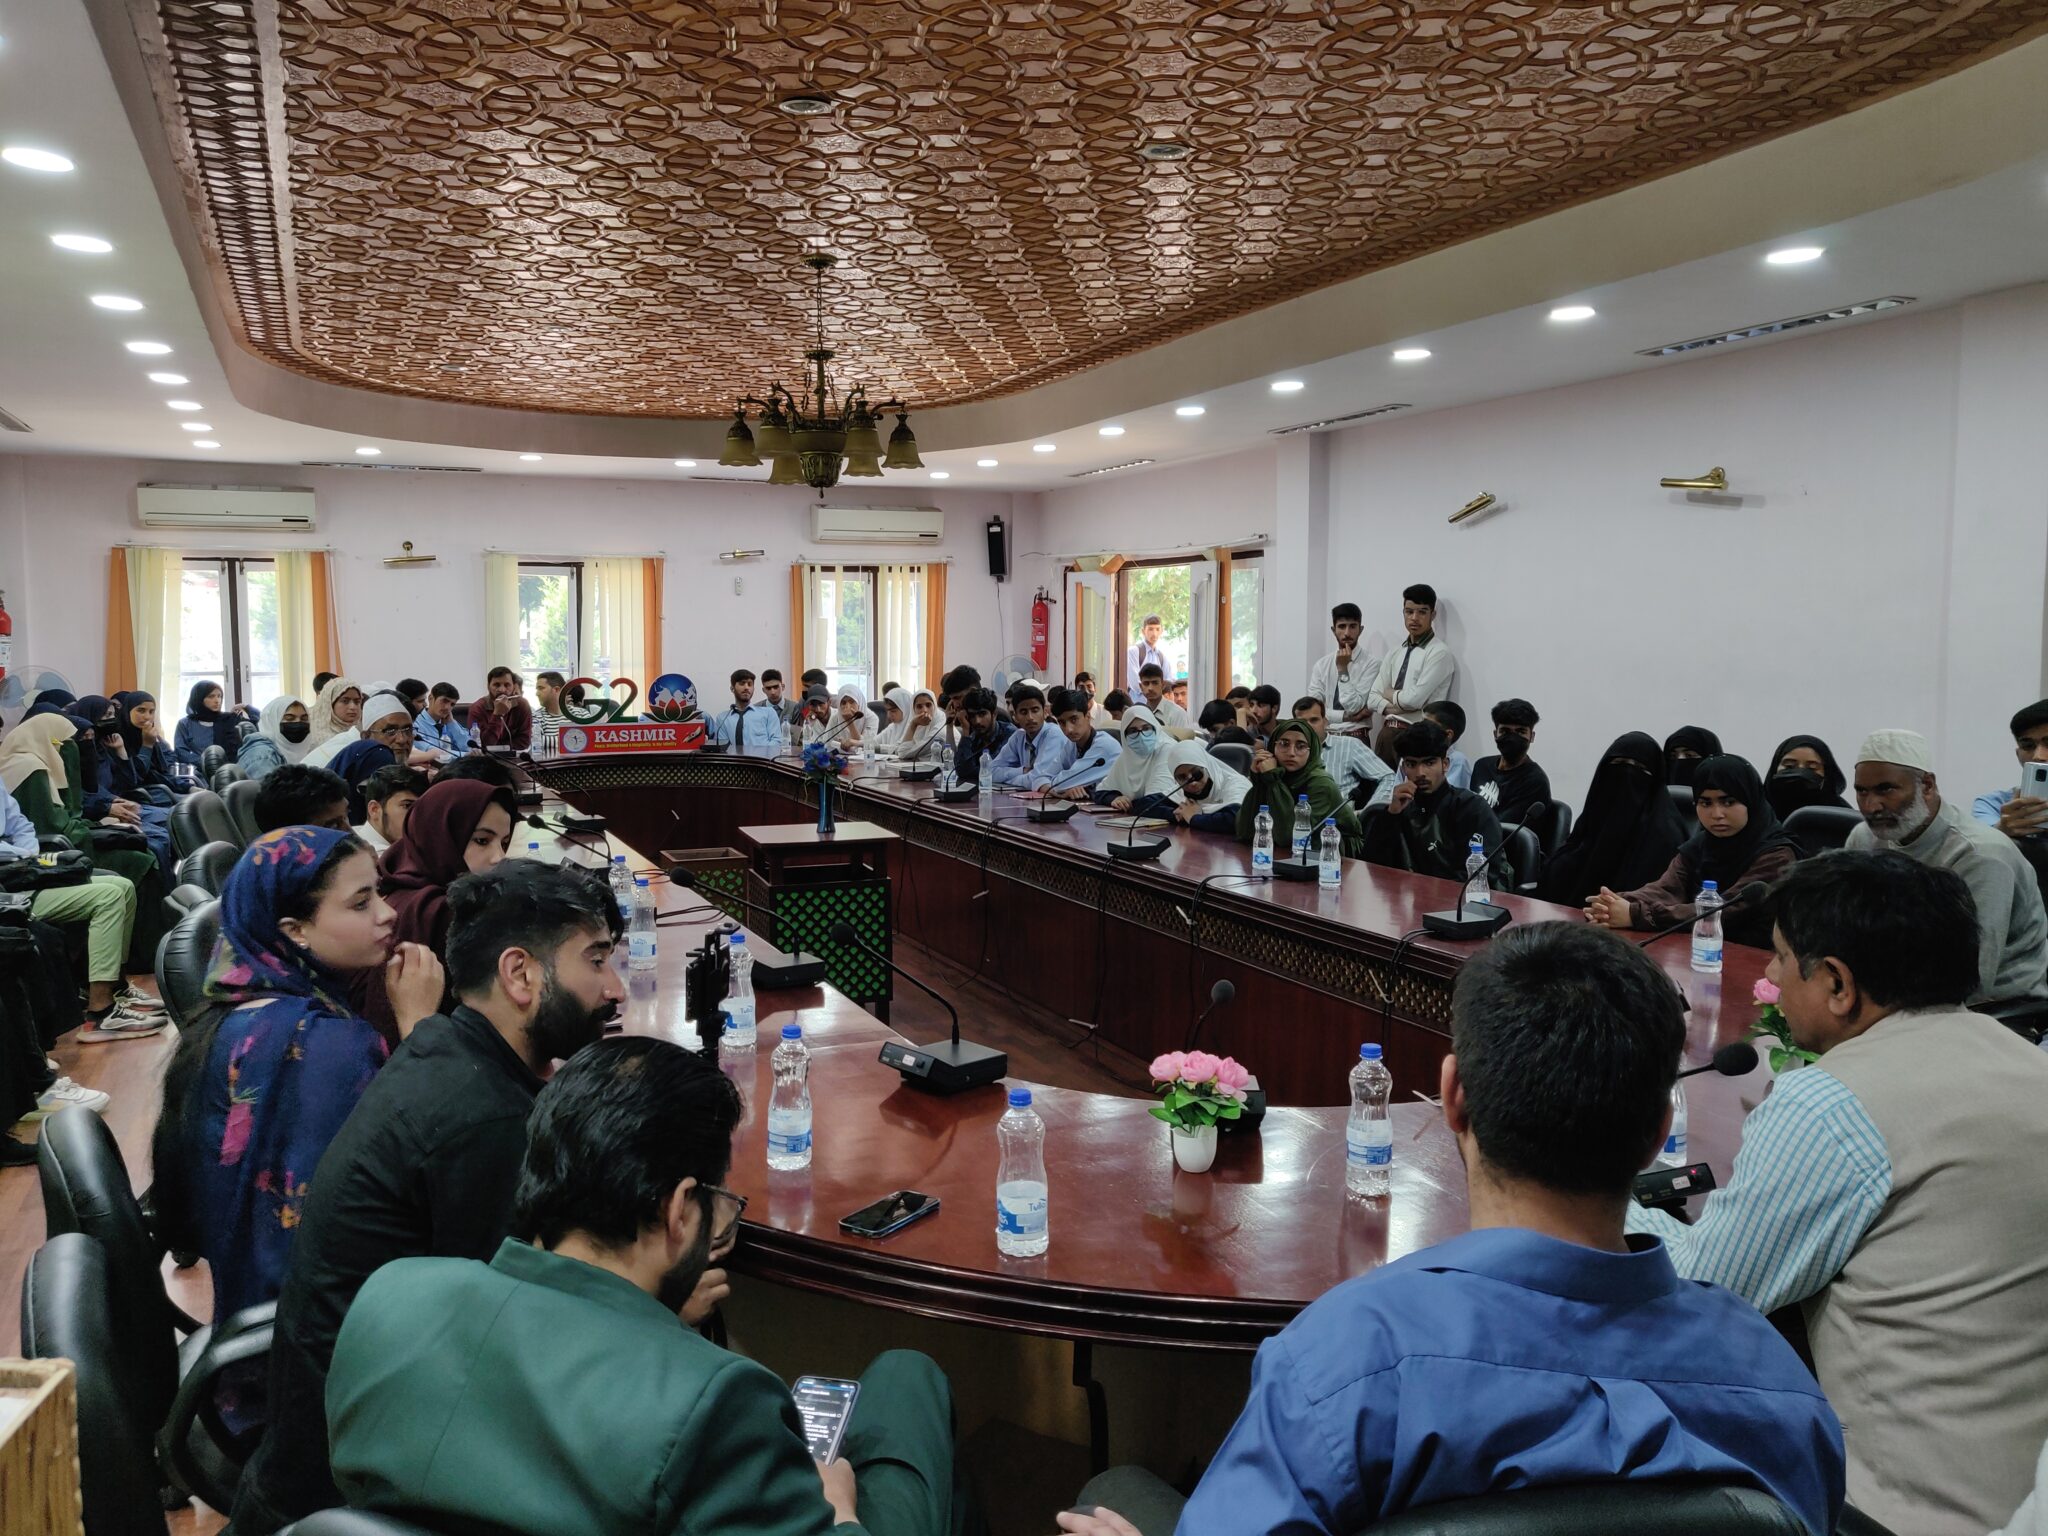 VPJ Organizes Y-20 Youth Summit At Manasbal, Resolves To Set Up Global Platform For Youth Of J&K With The Help Of G-20 Members